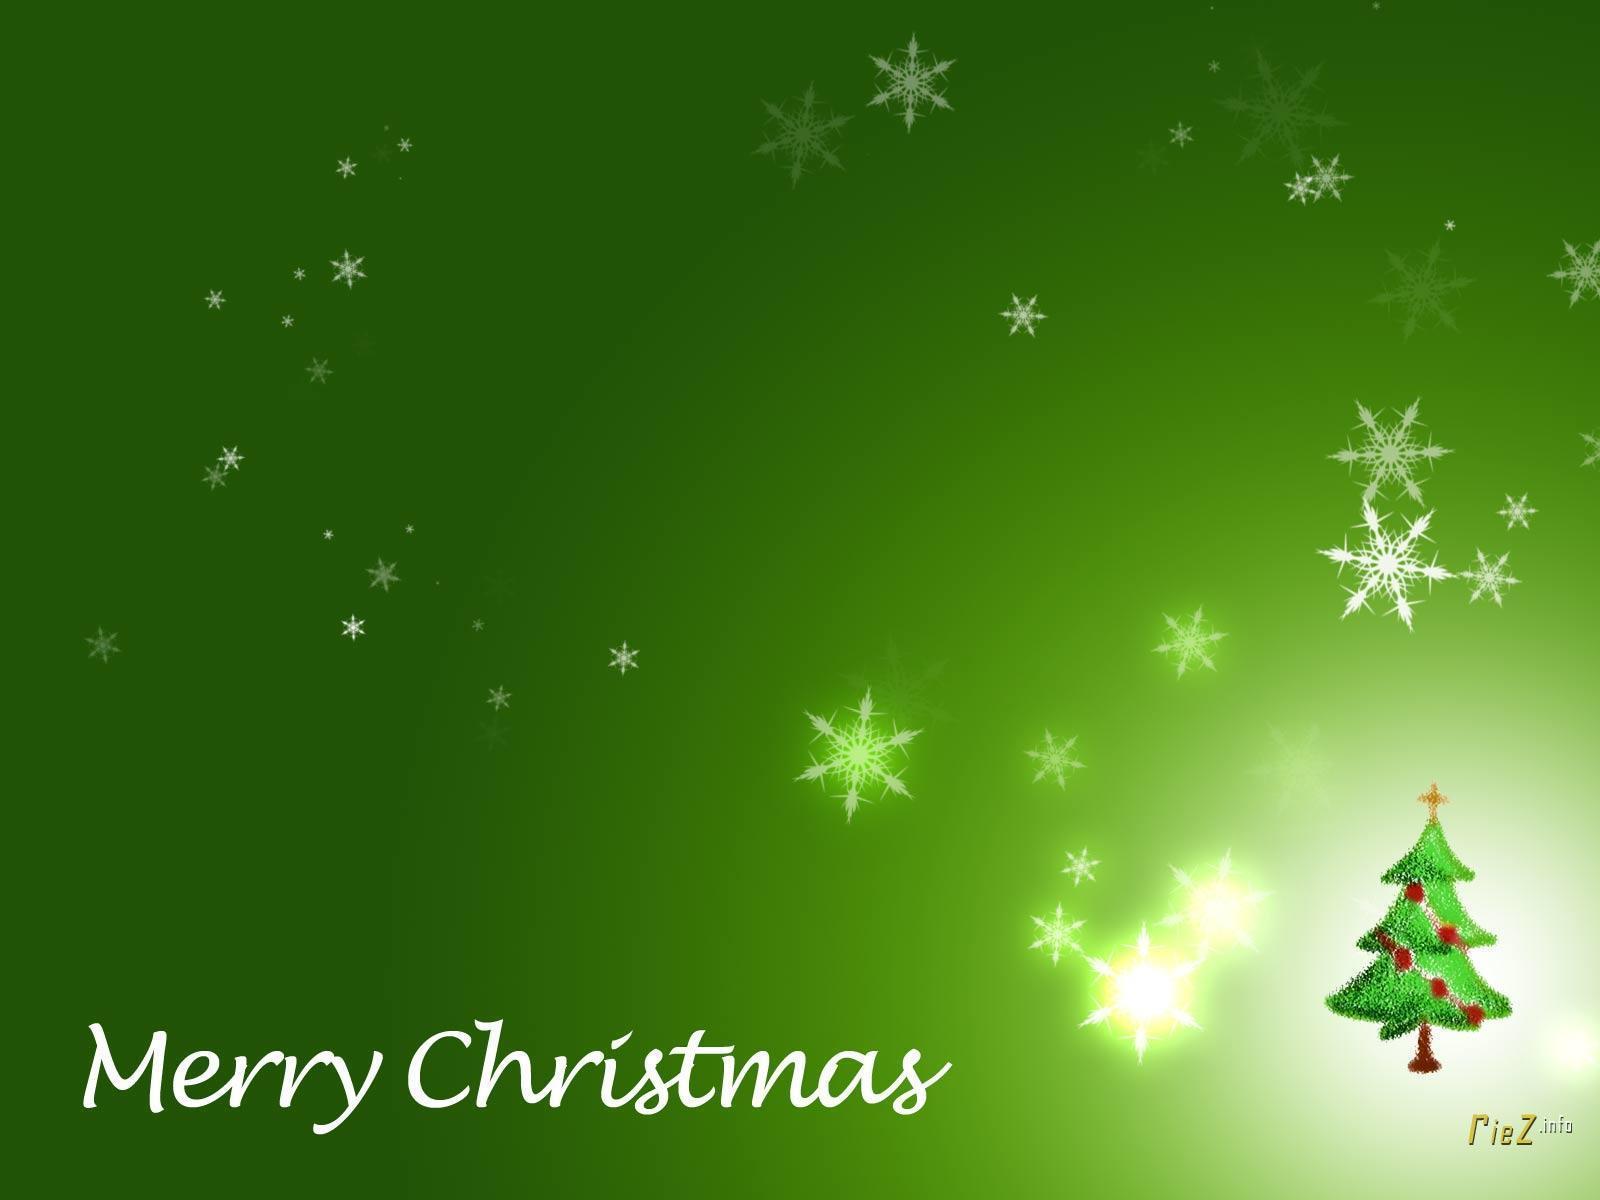 Christmas Background Image. Free Internet Picture